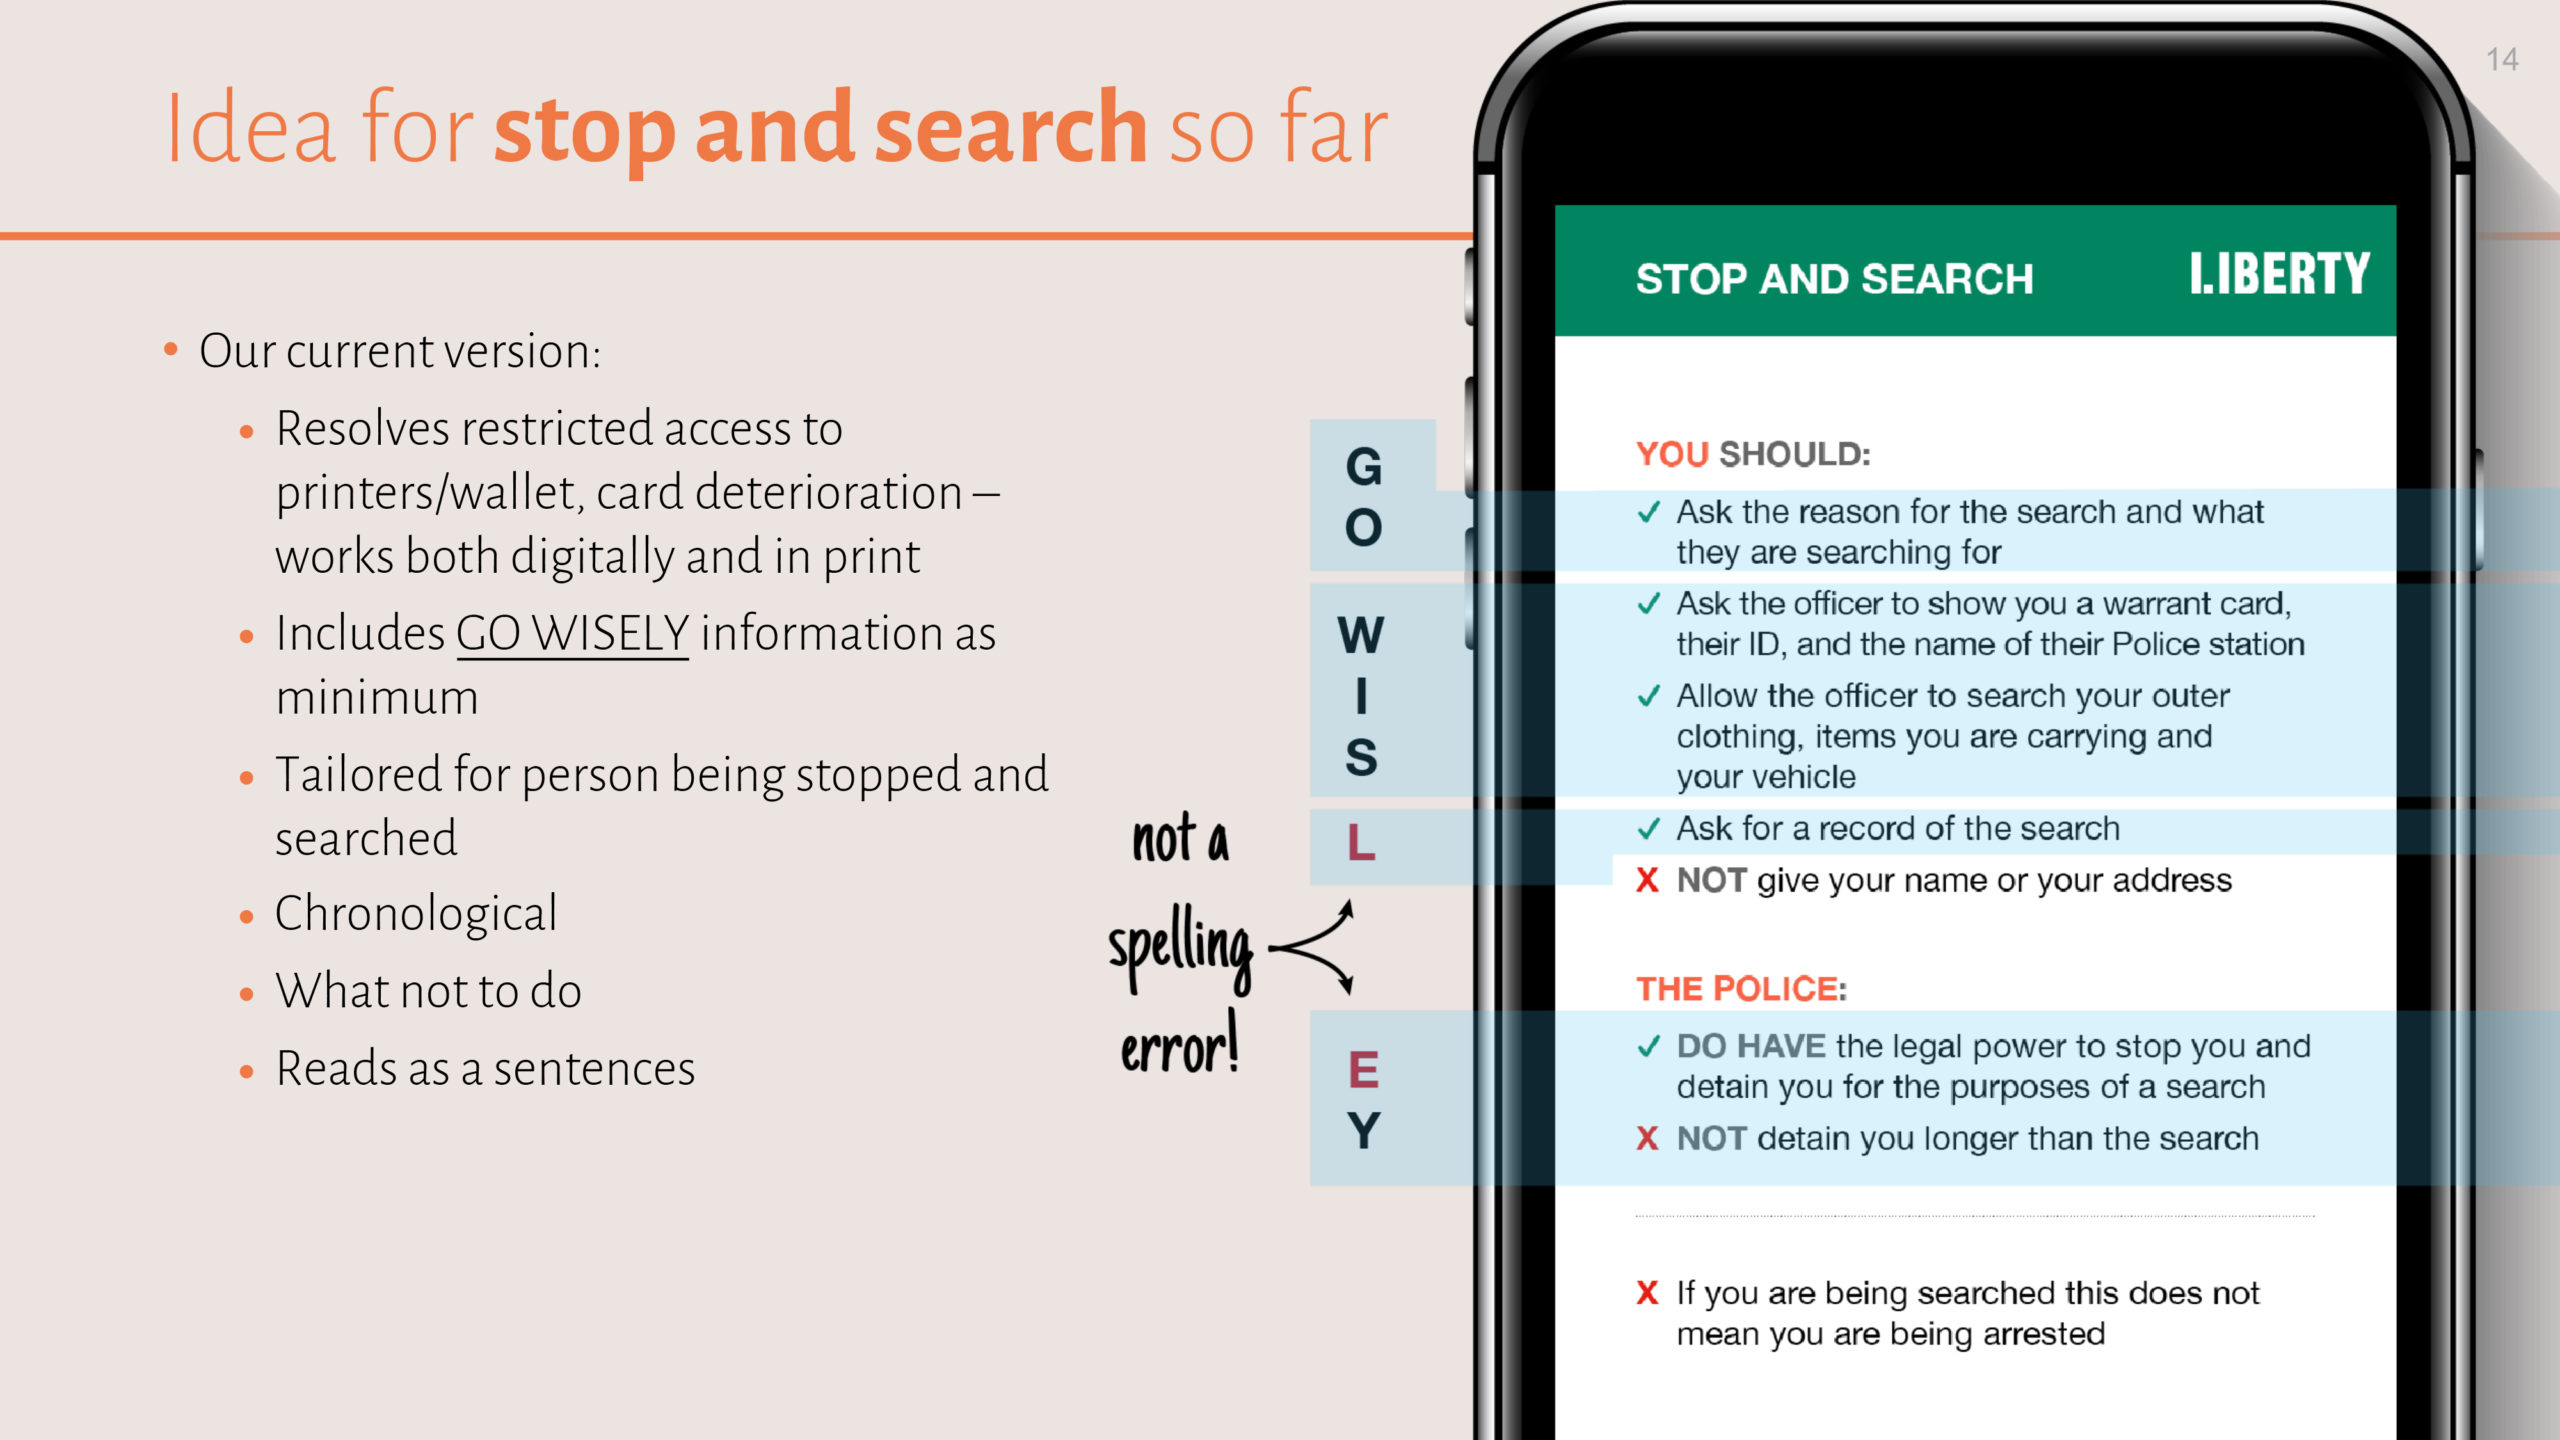 An image that displays text as a checklist that can be used as an aide memoire in a stop and search event